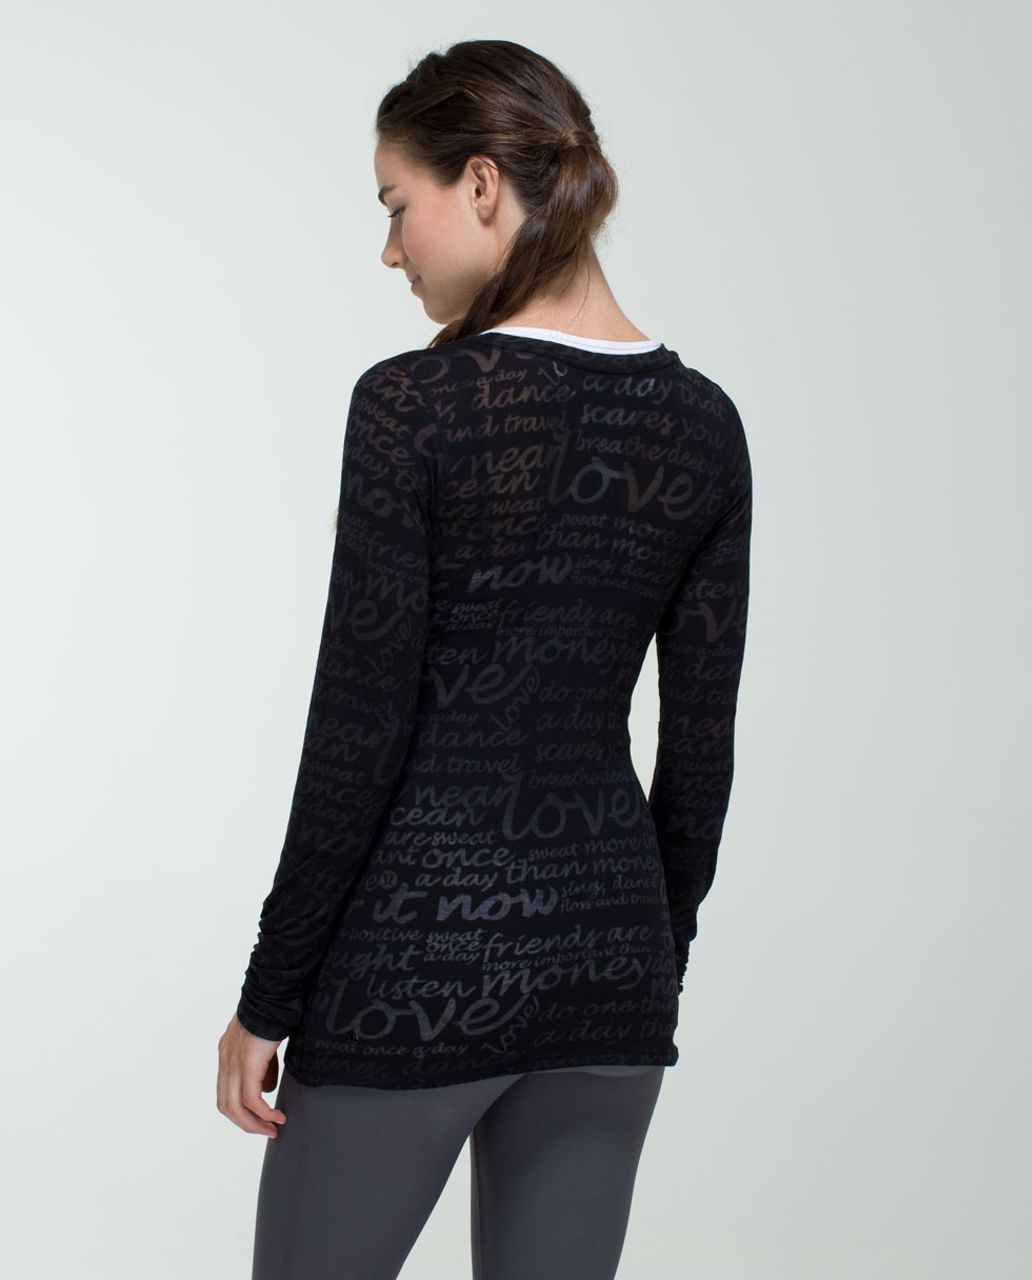 Lululemon Daily Practice Long Sleeve (First Release) - See Love Manifesto Burnout Black